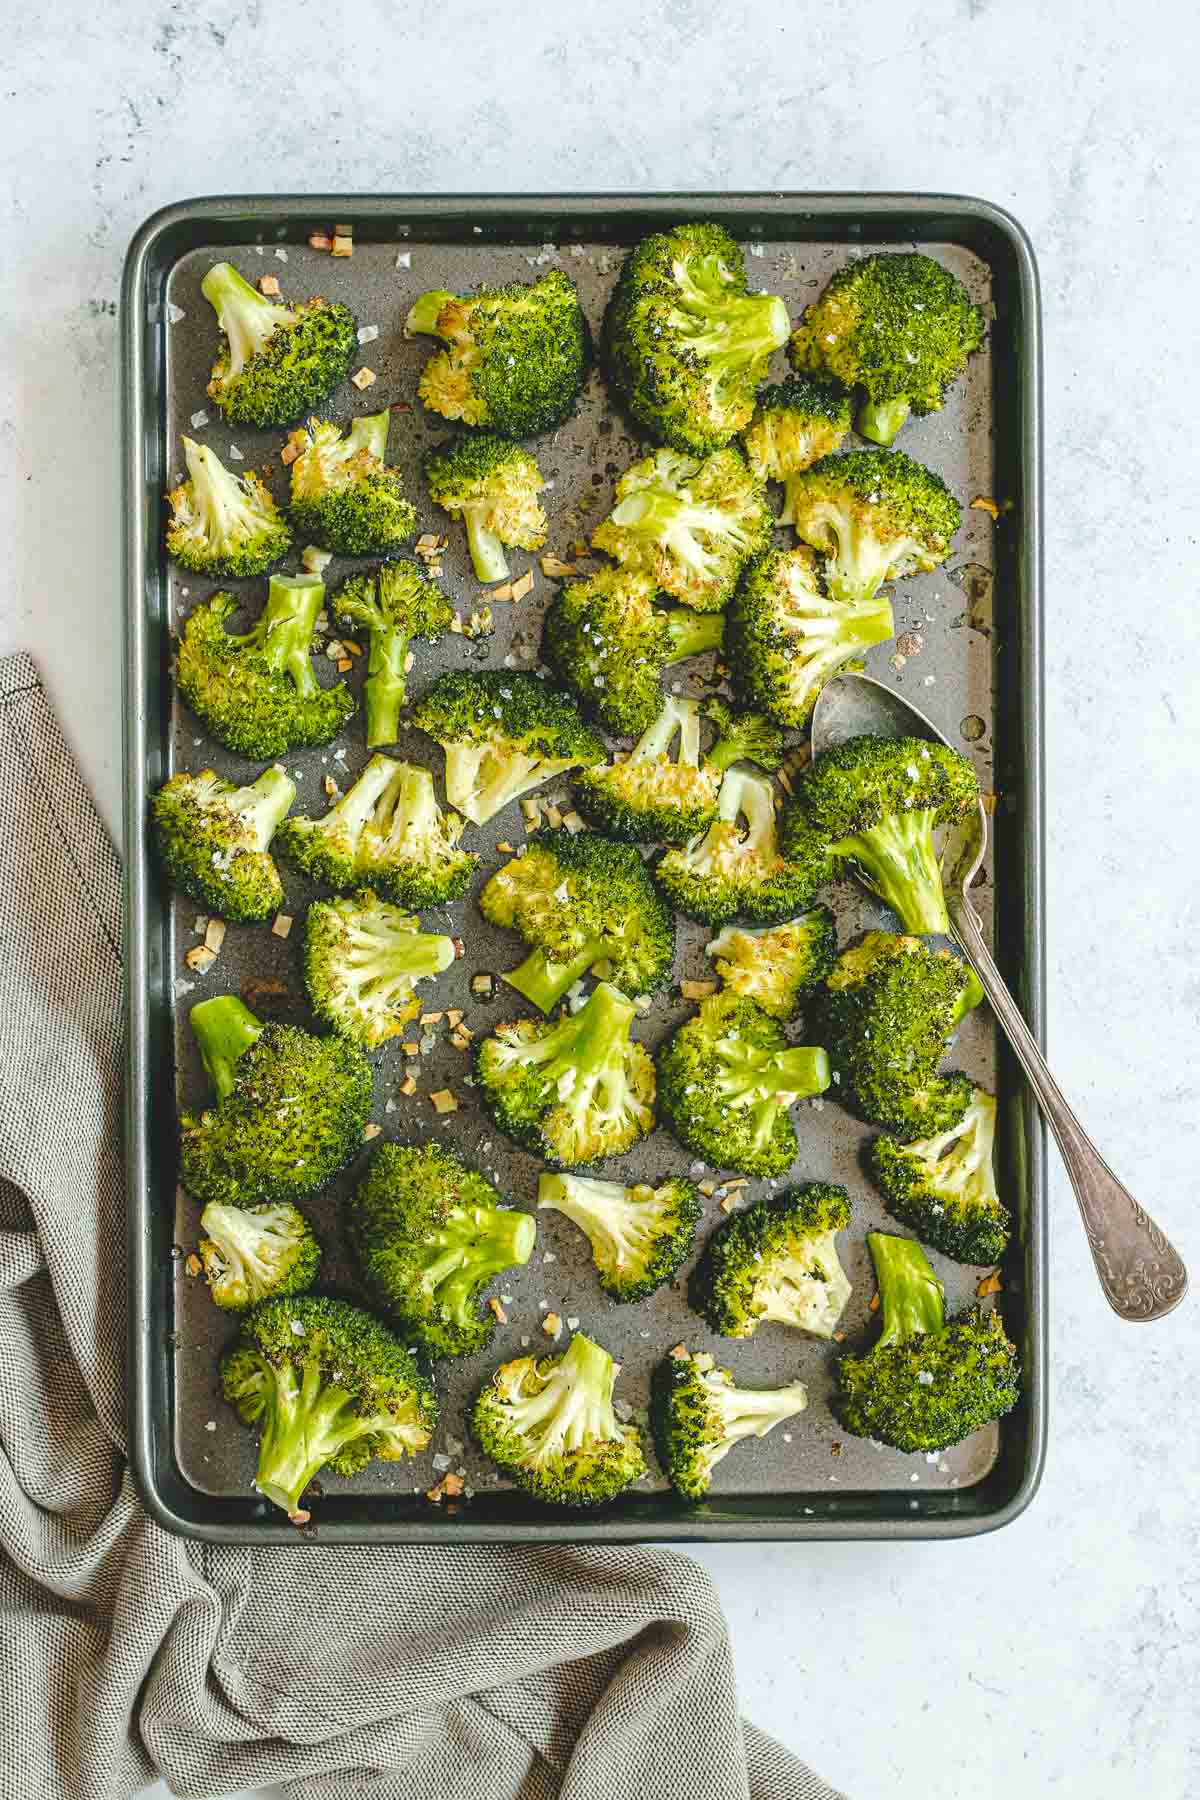 Roasted Broccoli with Garlic finished in pan